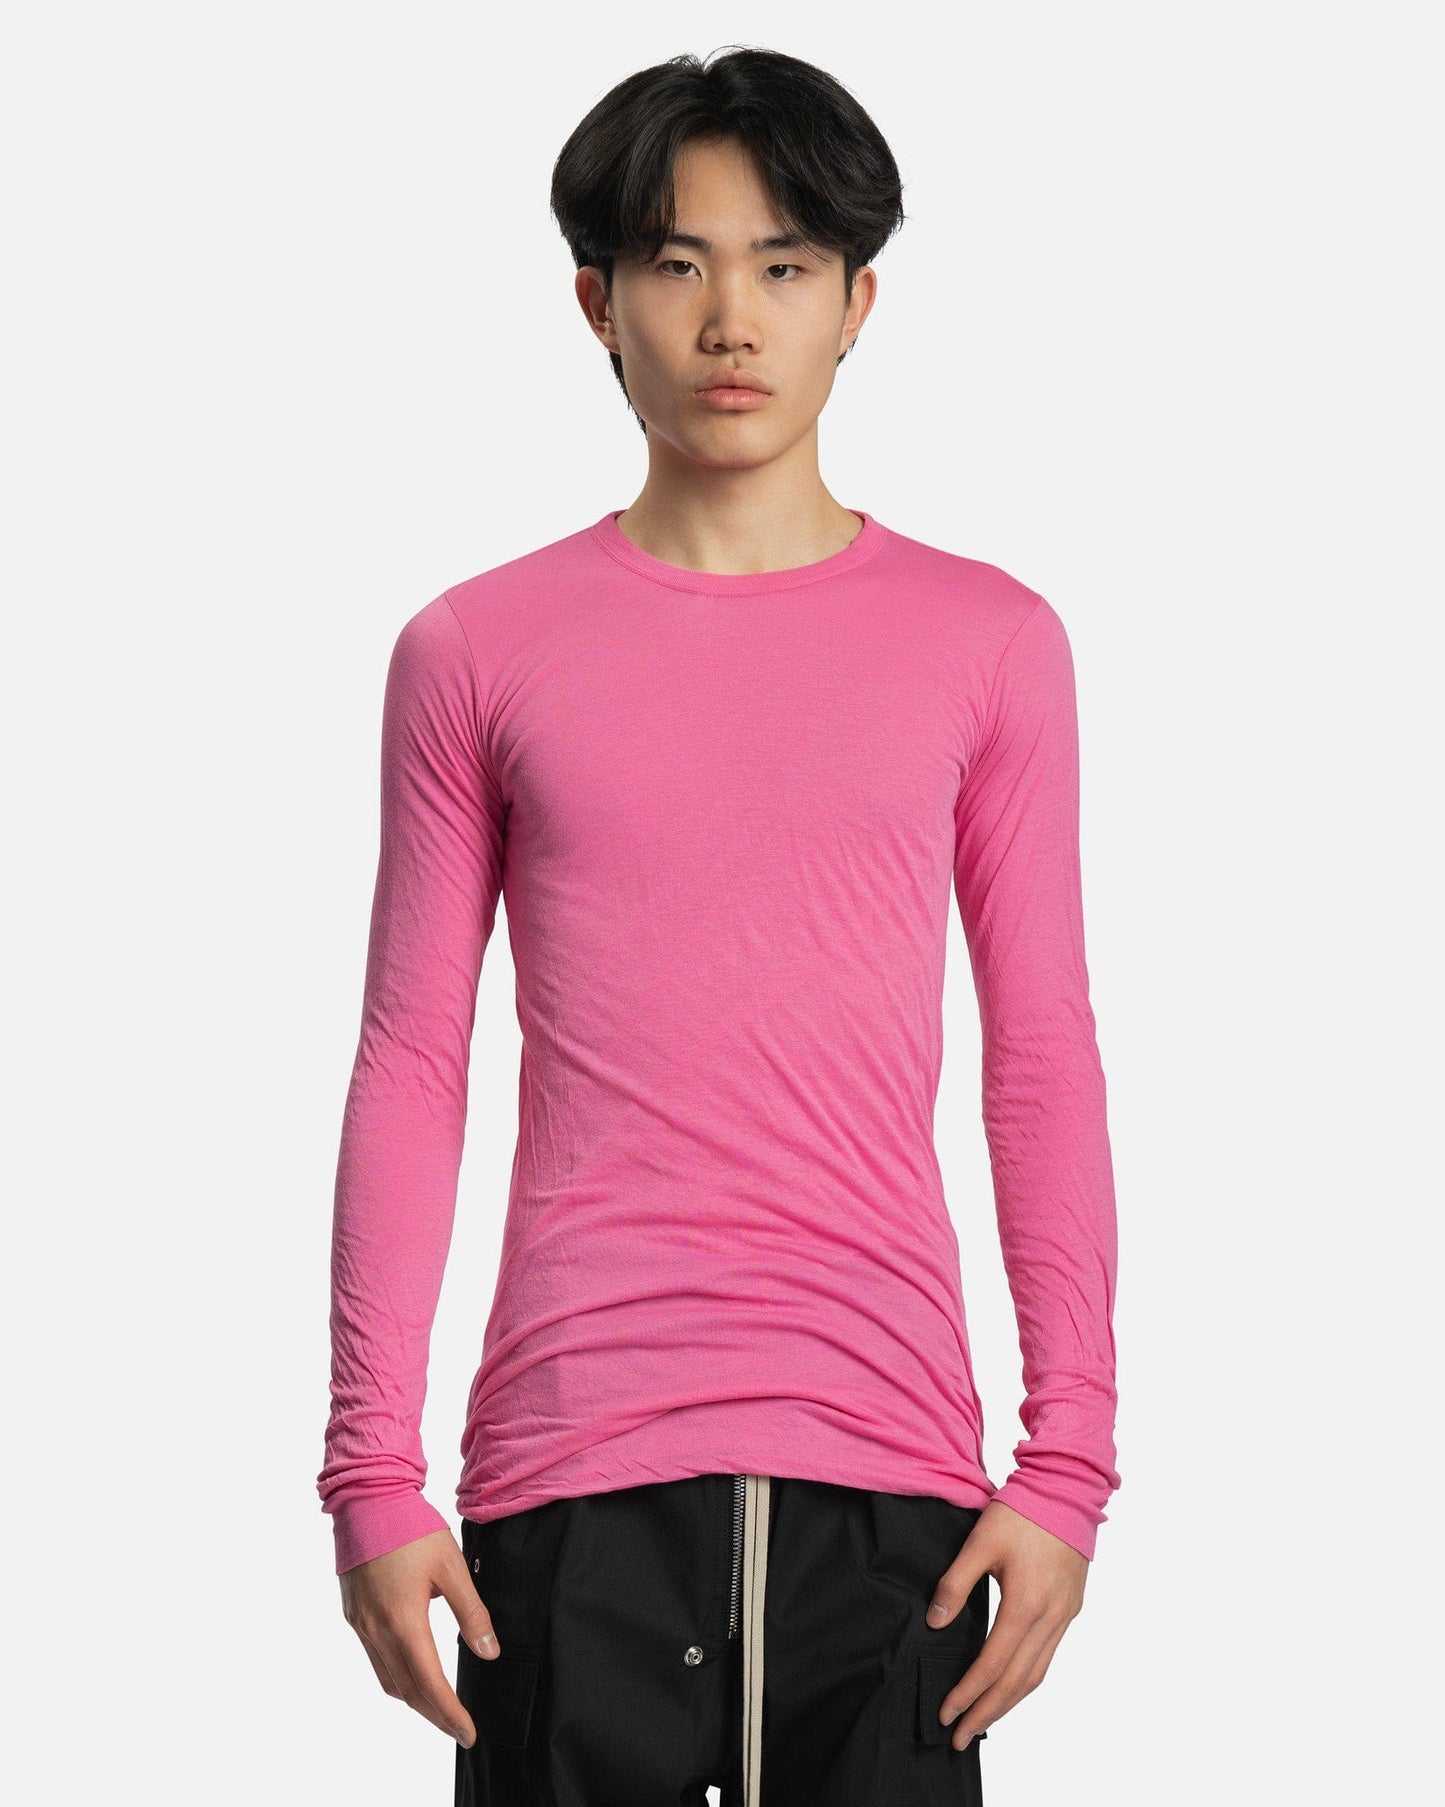 Rick Owens Men's T-Shirts Double LS T in Hot Pink